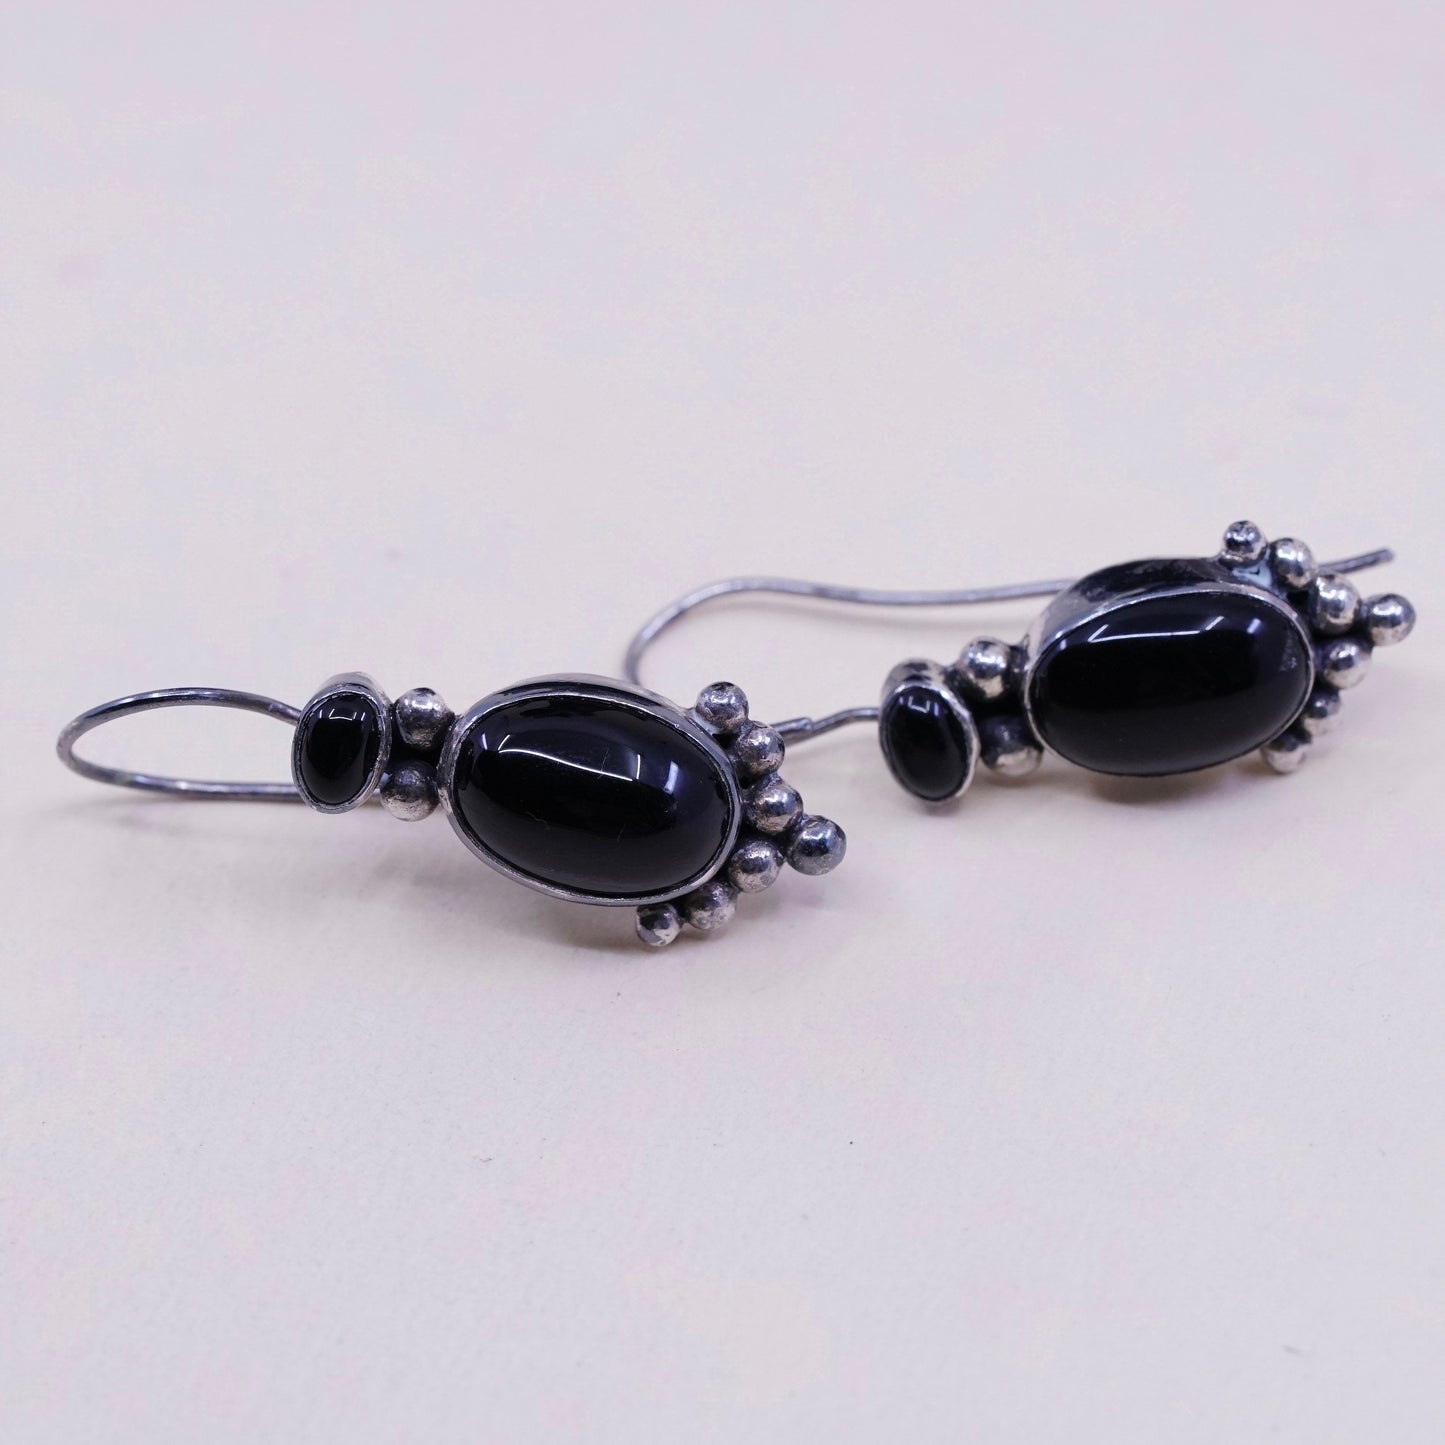 Vintage Sterling 925 silver handmade earrings with obsidian with beads